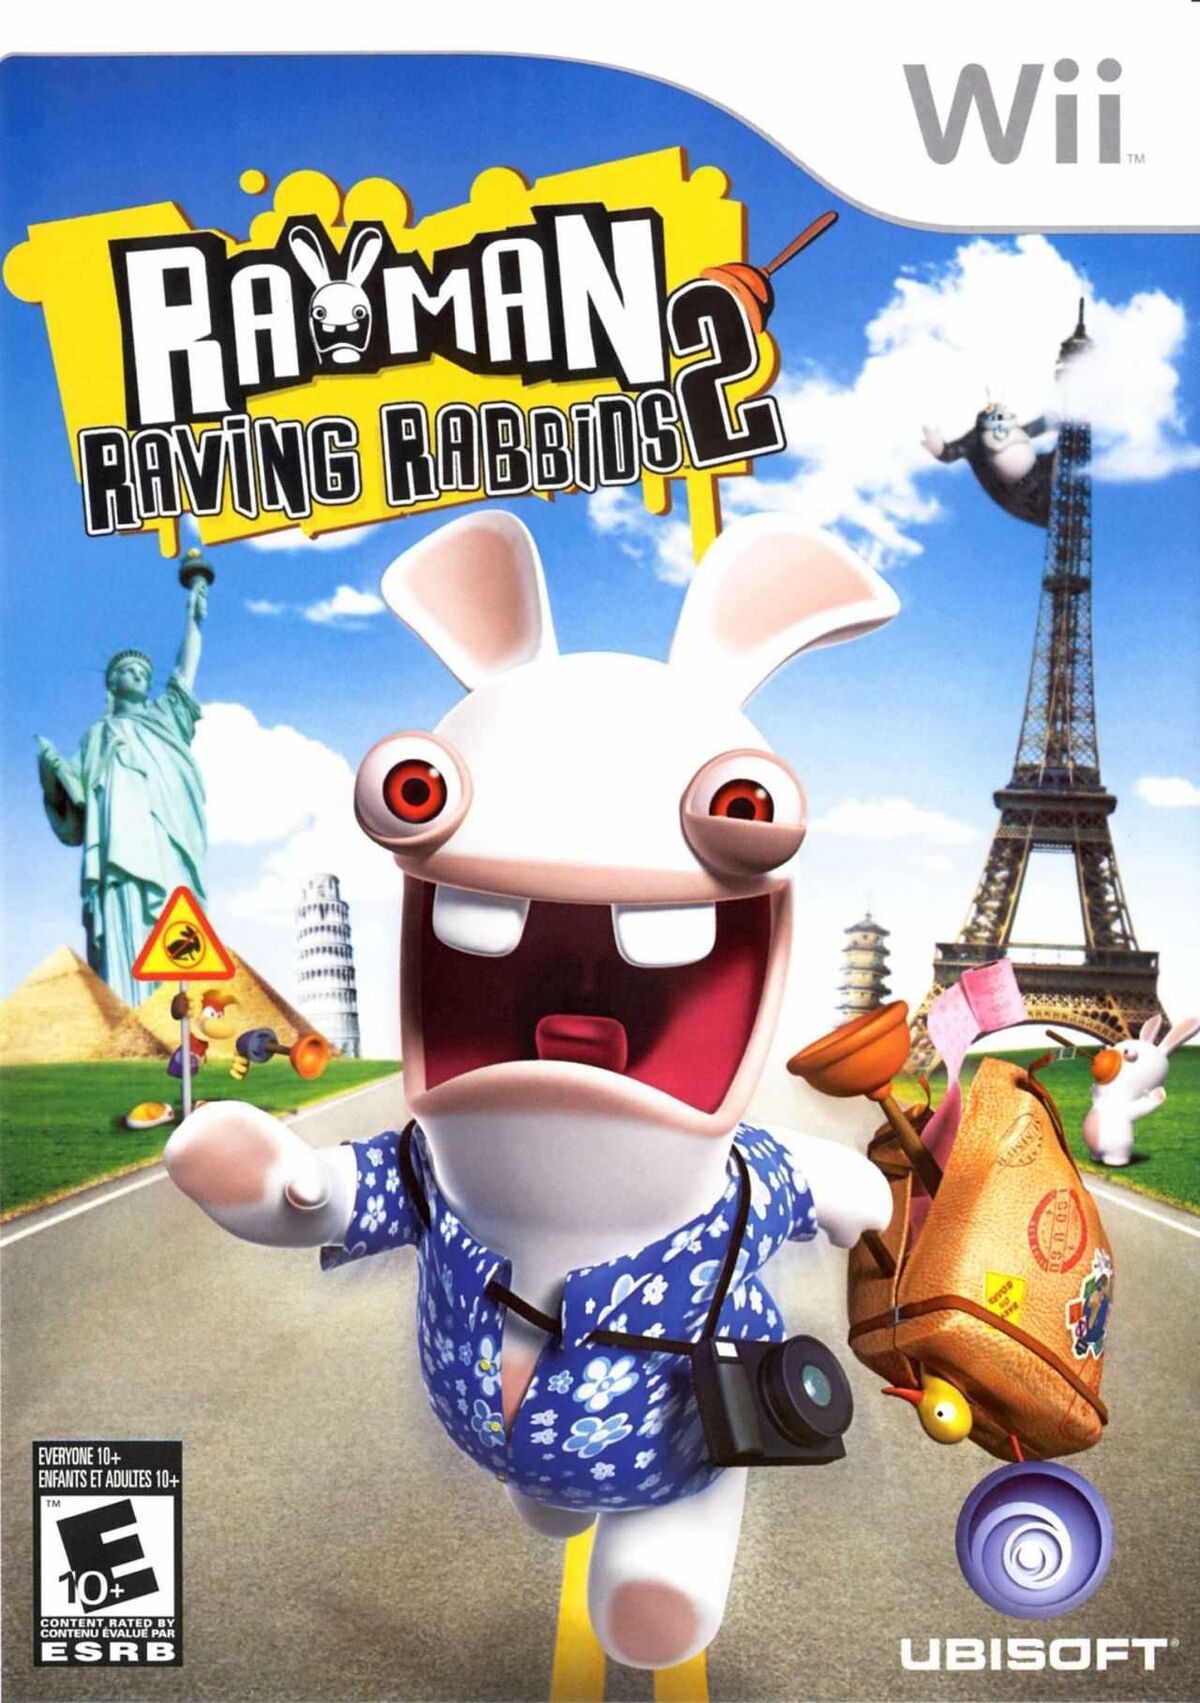 rayman-raving-rabbids-2-strategywiki-strategy-guide-and-game-reference-wiki